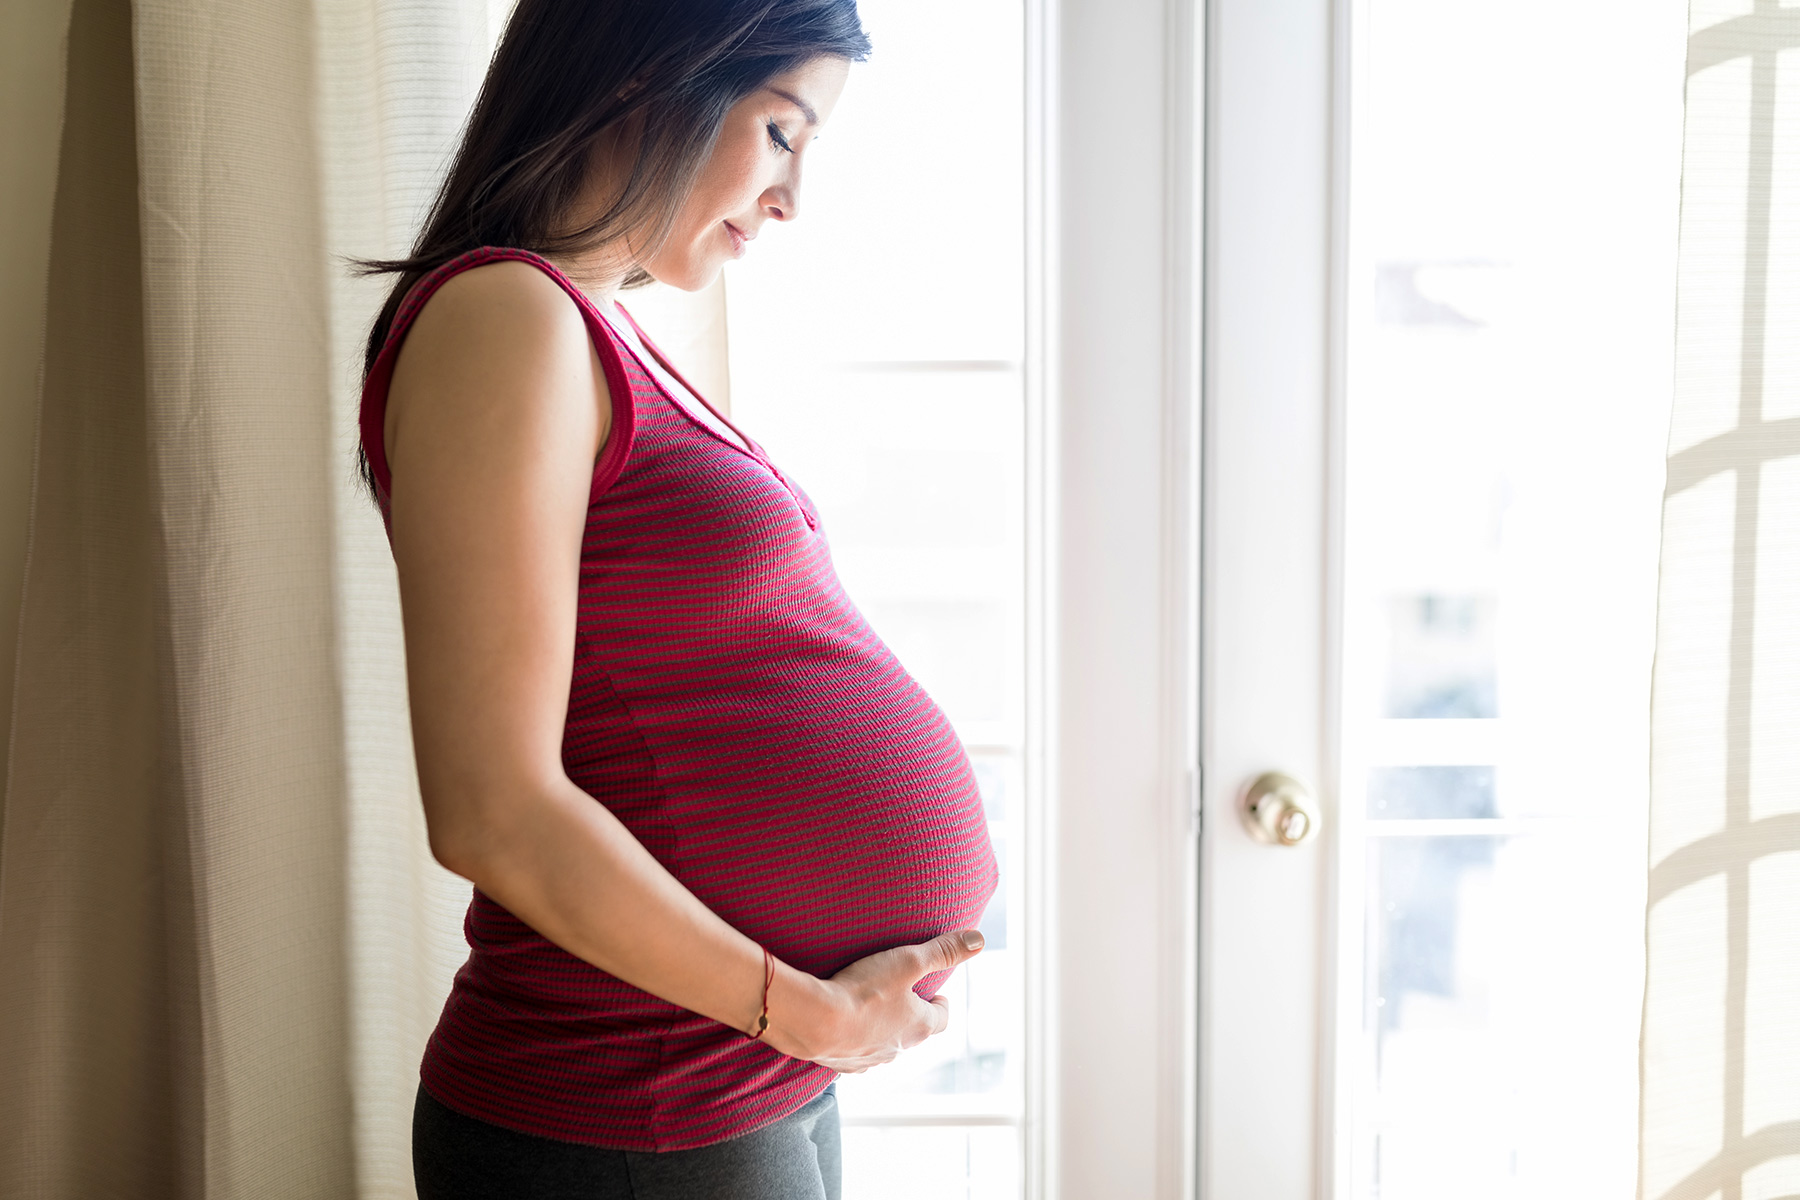 Important Things To Note During Pregnancy And Giving Birth Part 2